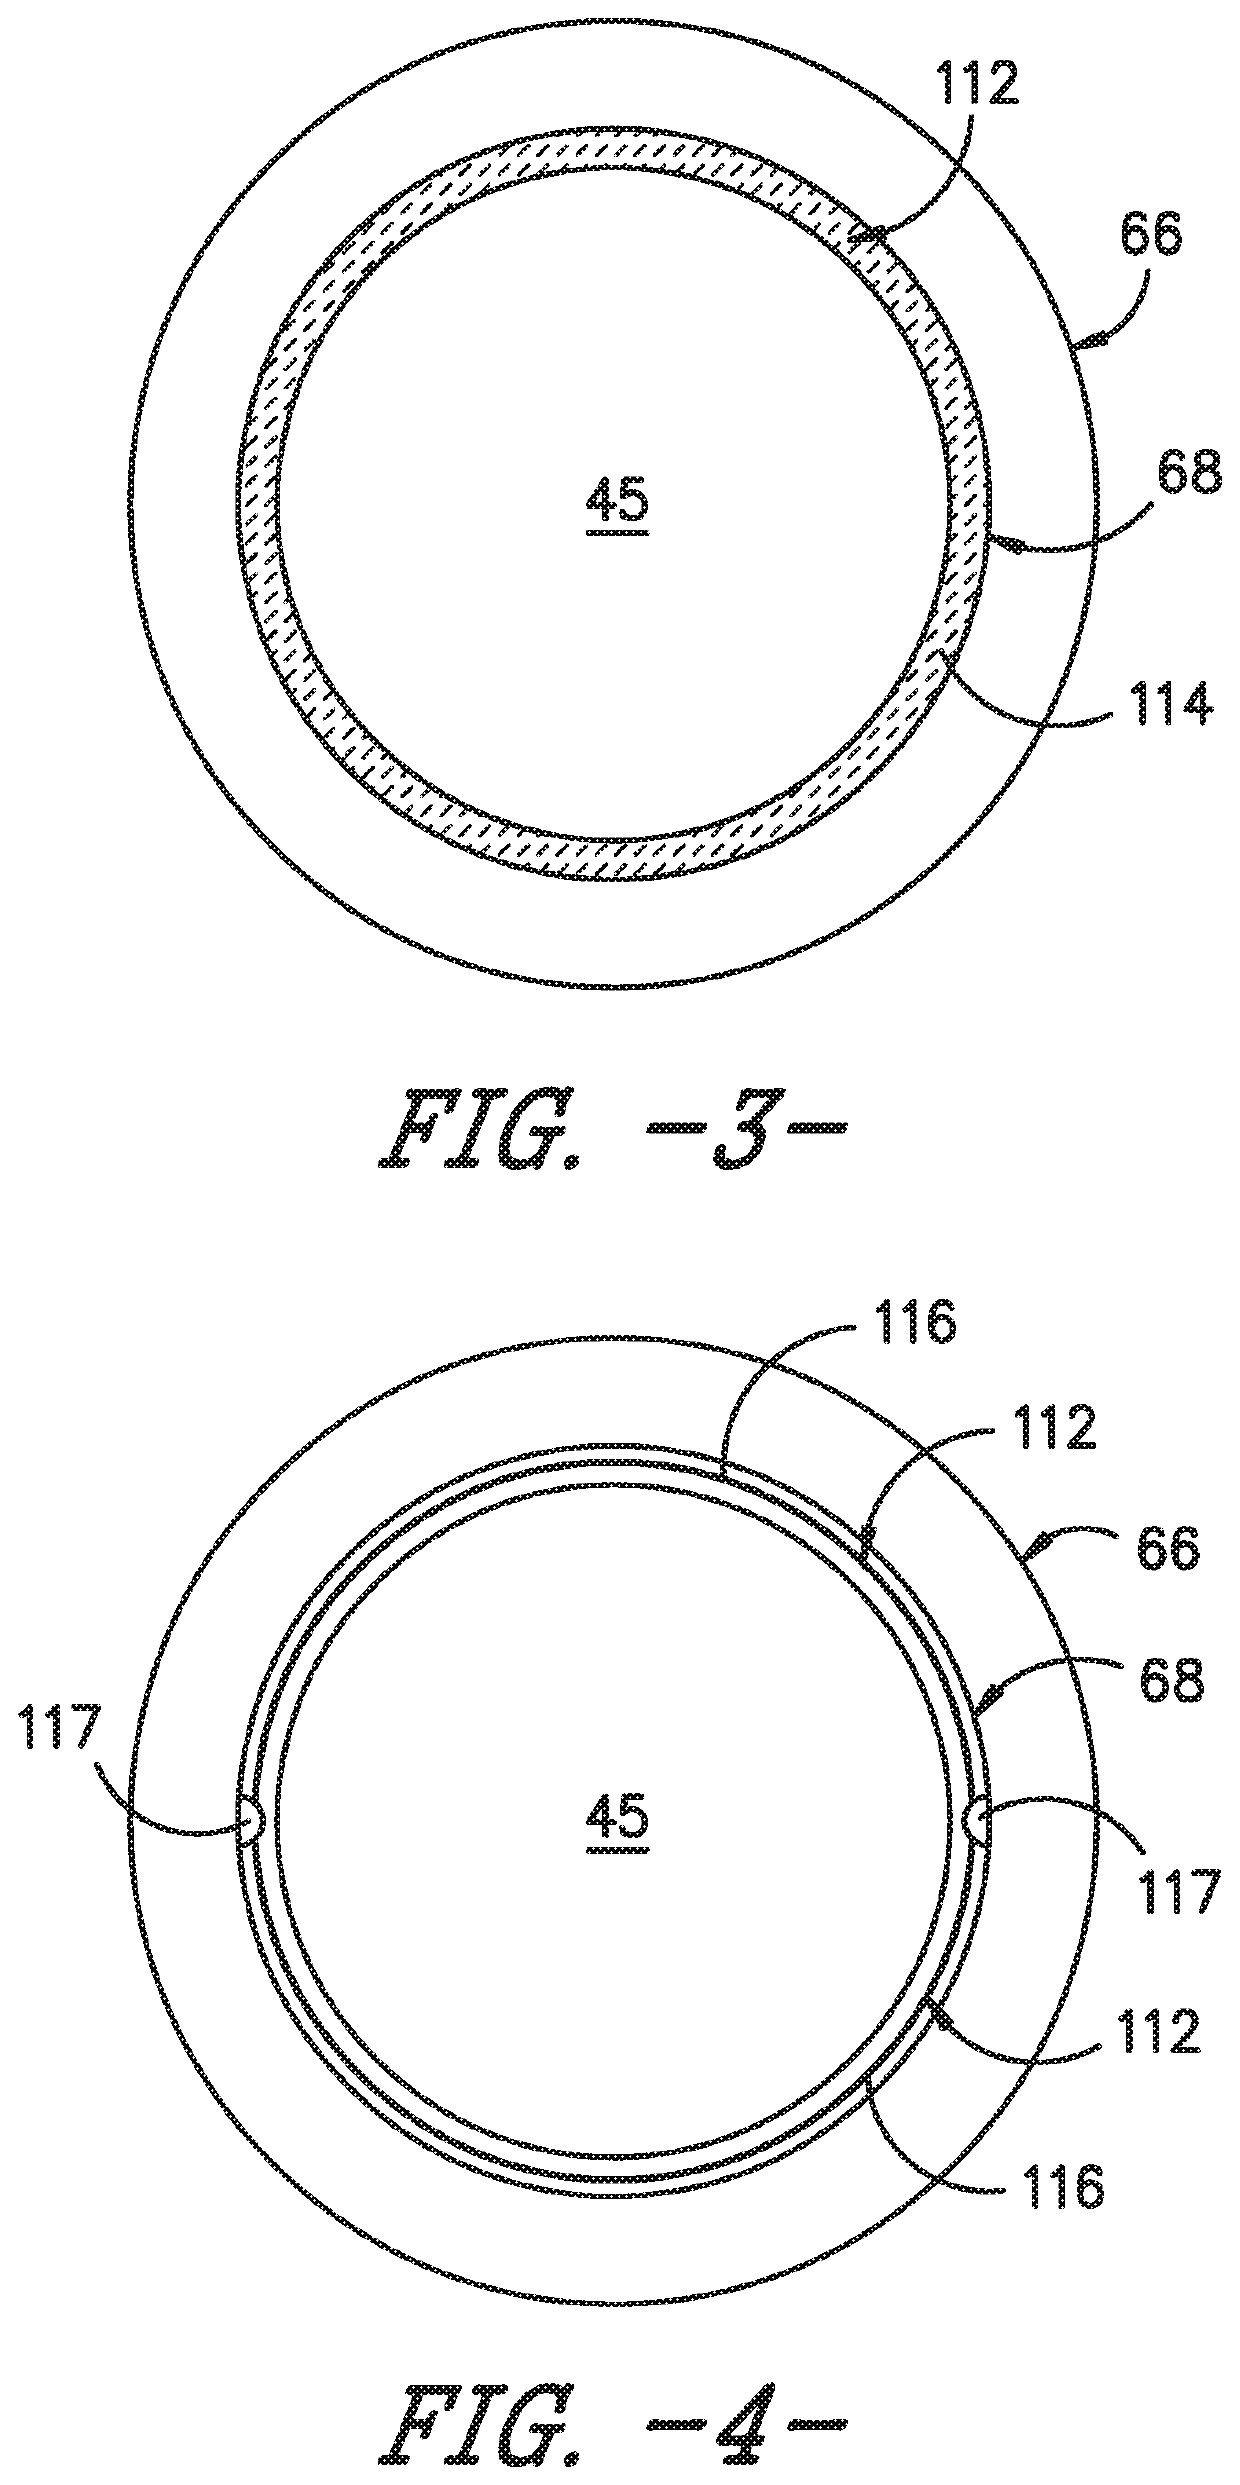 System and method for in situ repair of gas turbine engines